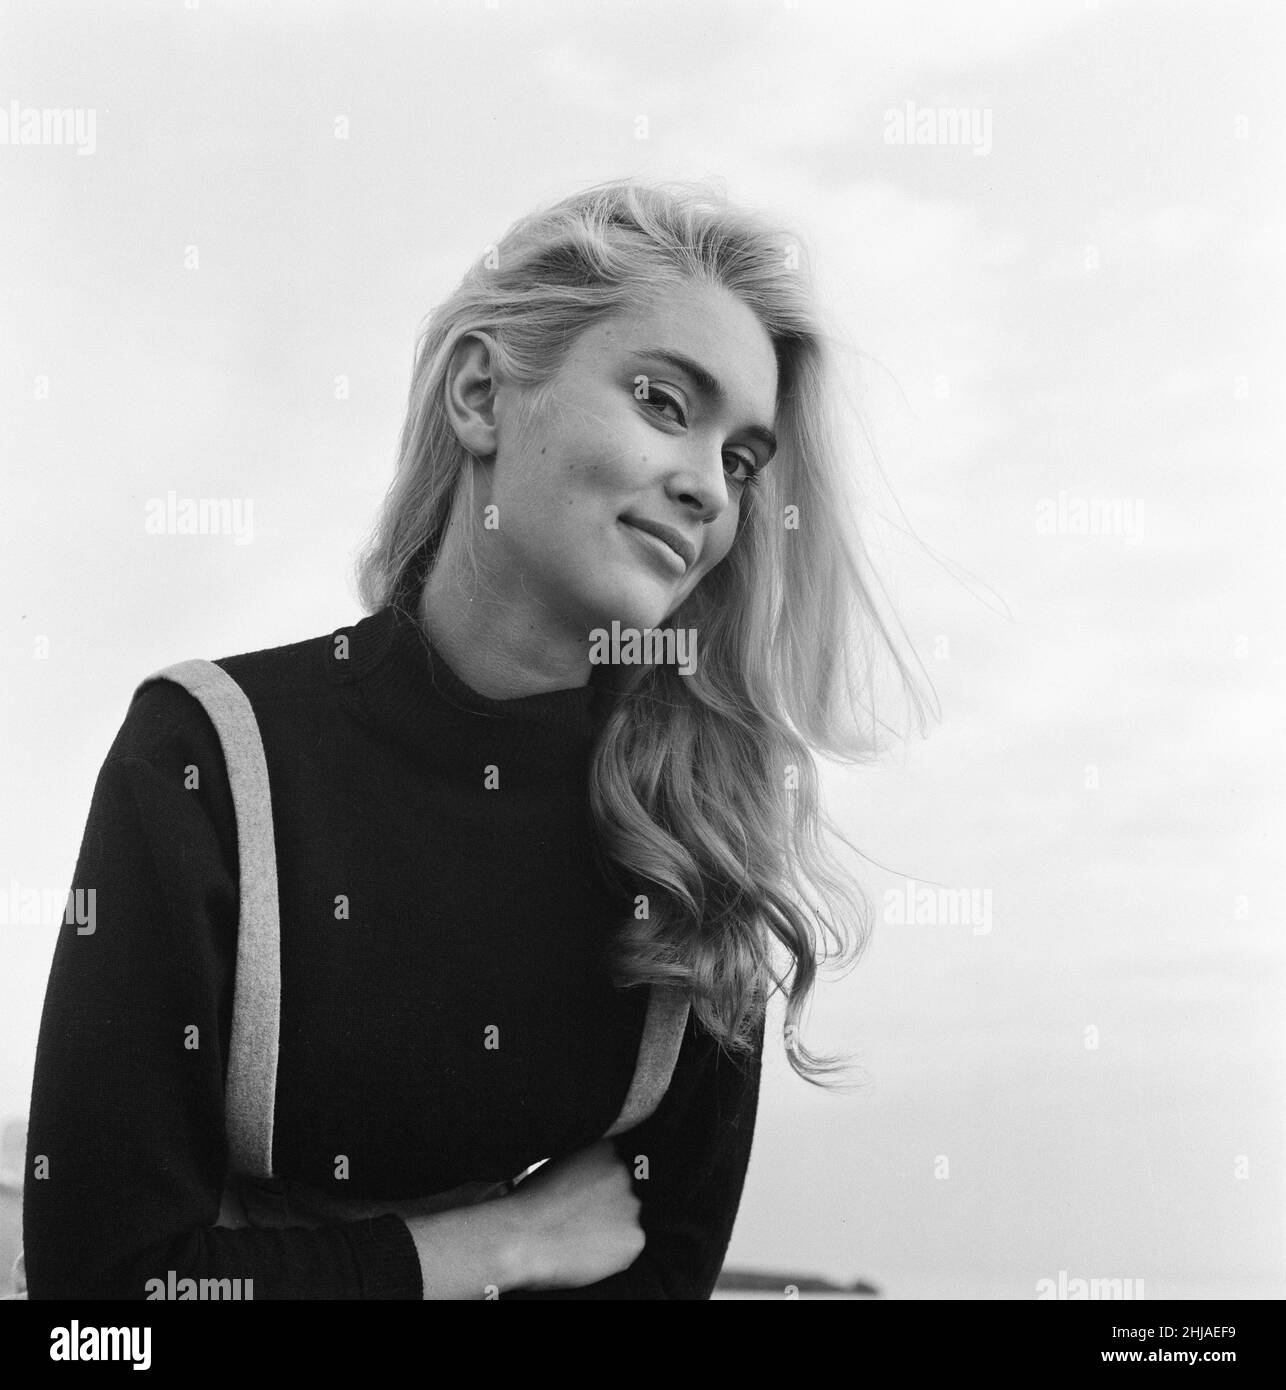 Alexandra Bastedo, 18 years old actress from Hove, Sussex, Friday 18th December 1964. Alex has recently appeared in The Count of Monte Cristo, television series as character Renée de Saint-Méran.  Pictured posing for pictures on beach at Hove. Stock Photo